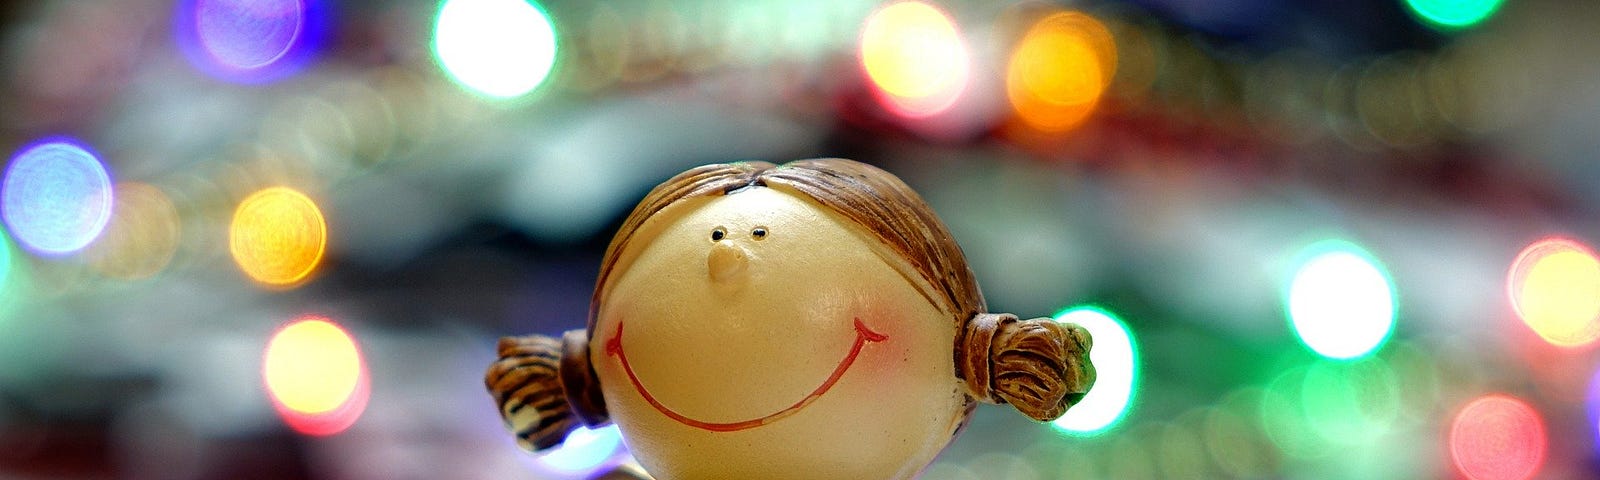 Figurine of a smiling angel holding a golden heart, with a lighted Christmas tree in the background